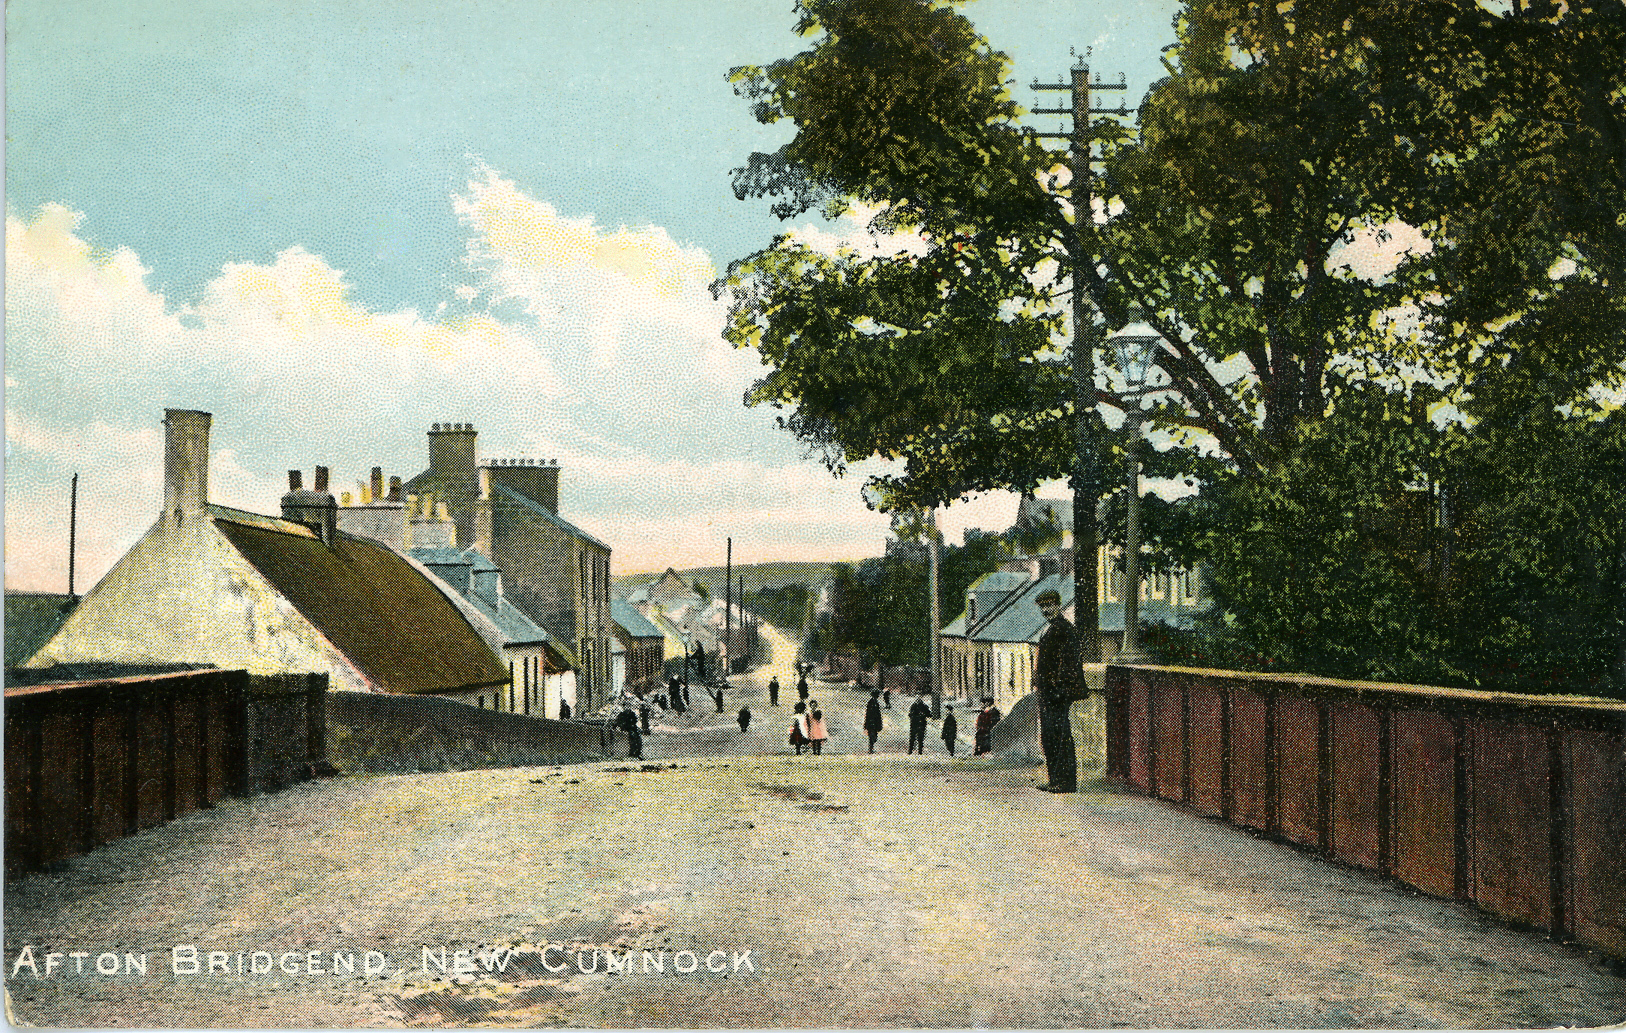 NEW CUMNOCK NOW AND THEN